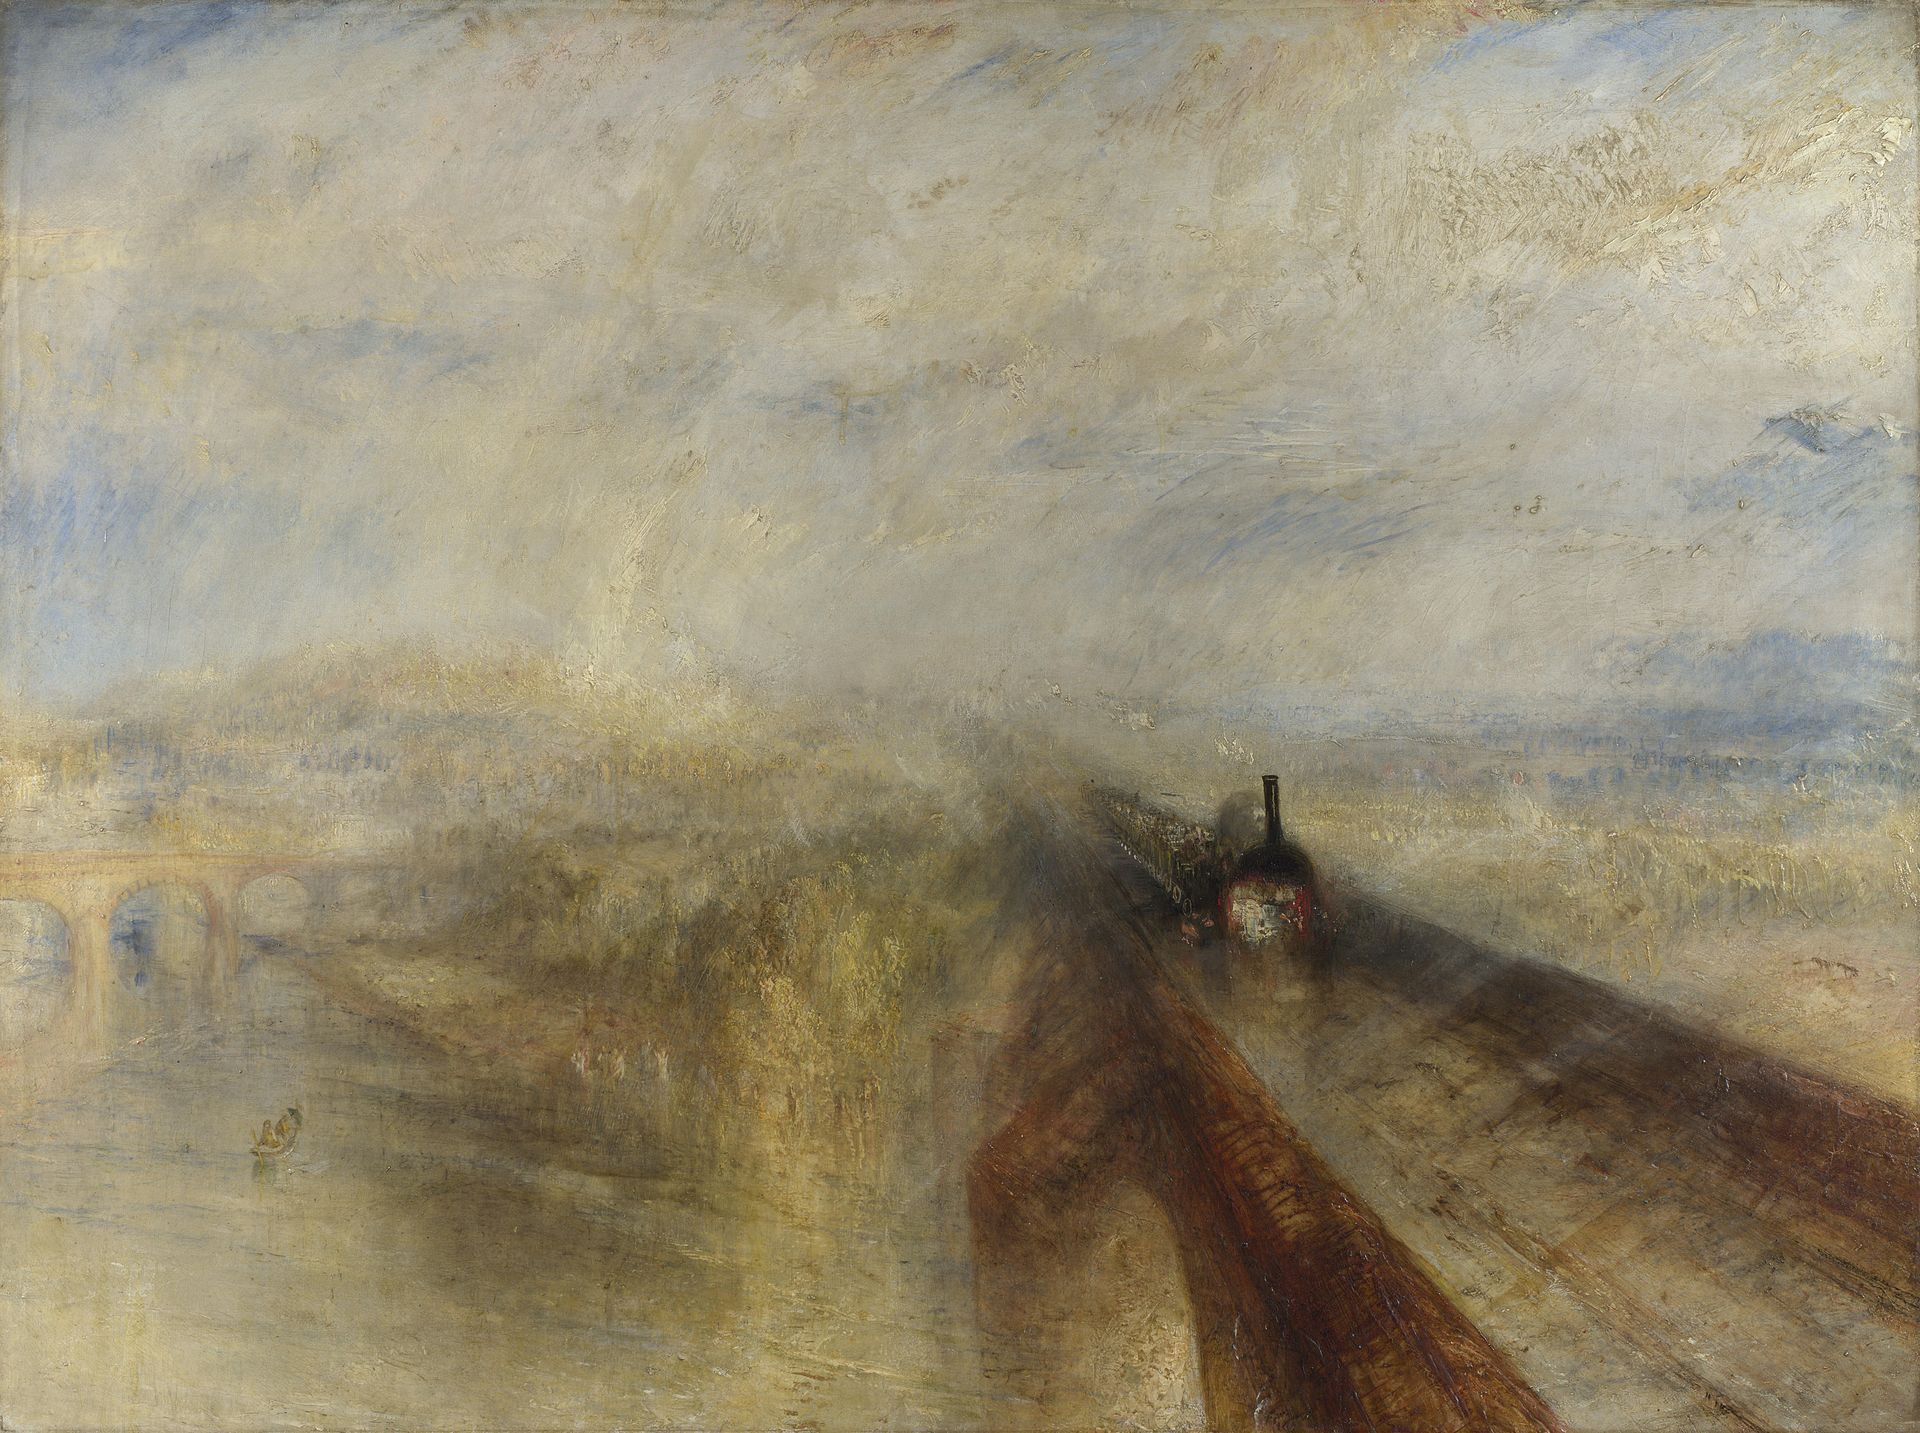 Rain, Steam and Speed – The Great Western Railway by Joseph Mallord William Turner - 1844 - 91 x 121.8 cm National Gallery